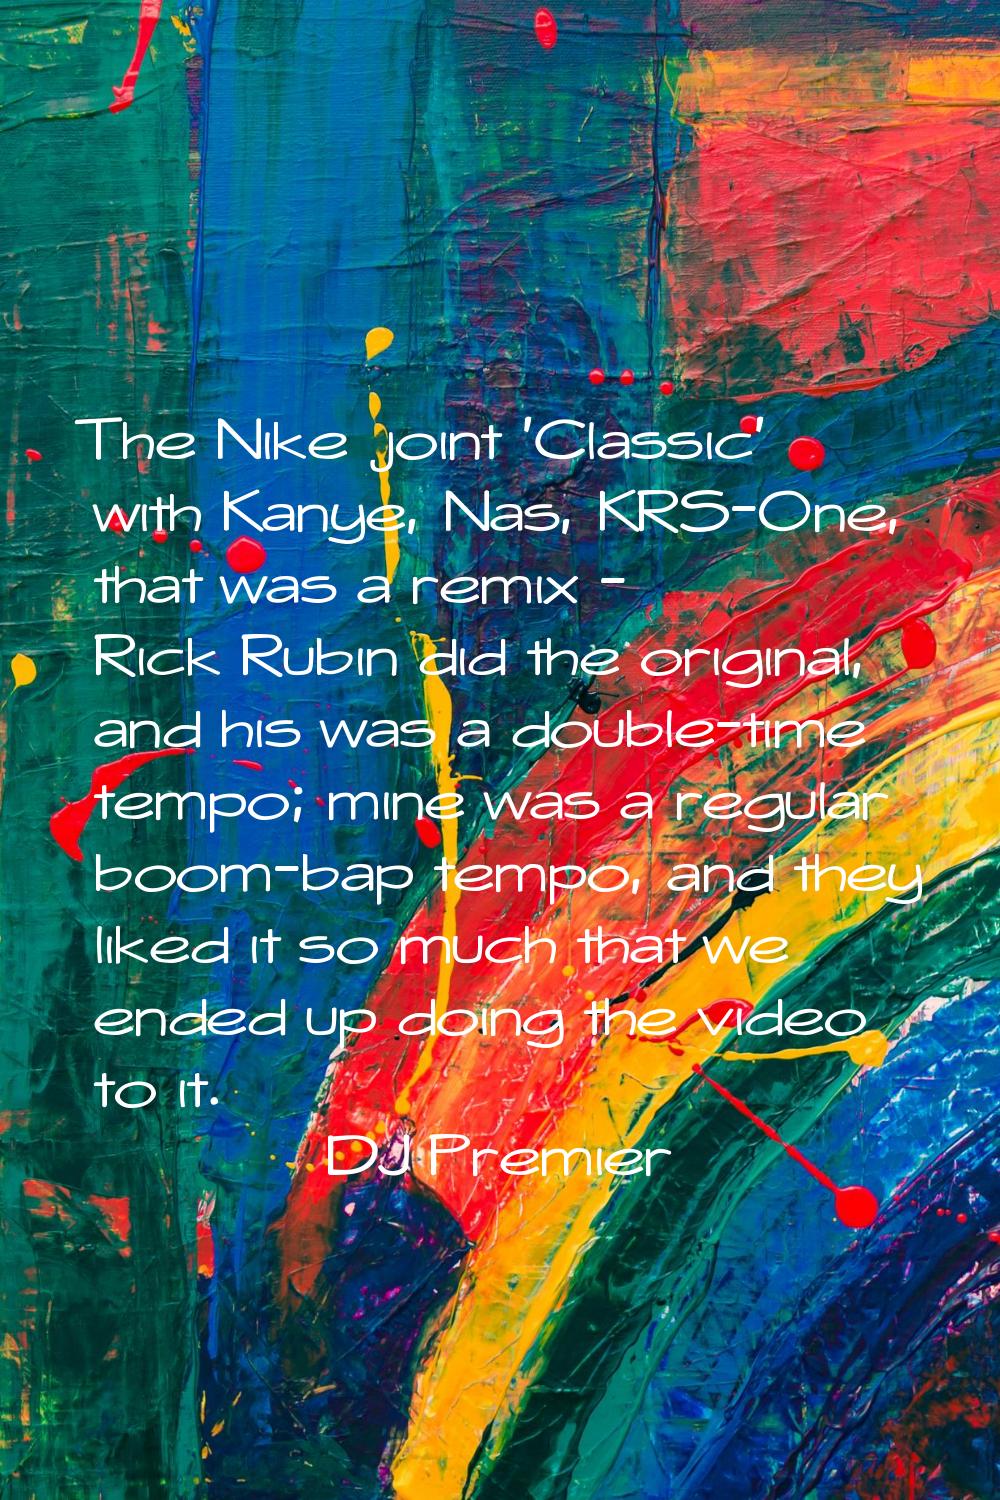 The Nike joint 'Classic' with Kanye, Nas, KRS-One, that was a remix - Rick Rubin did the original, 